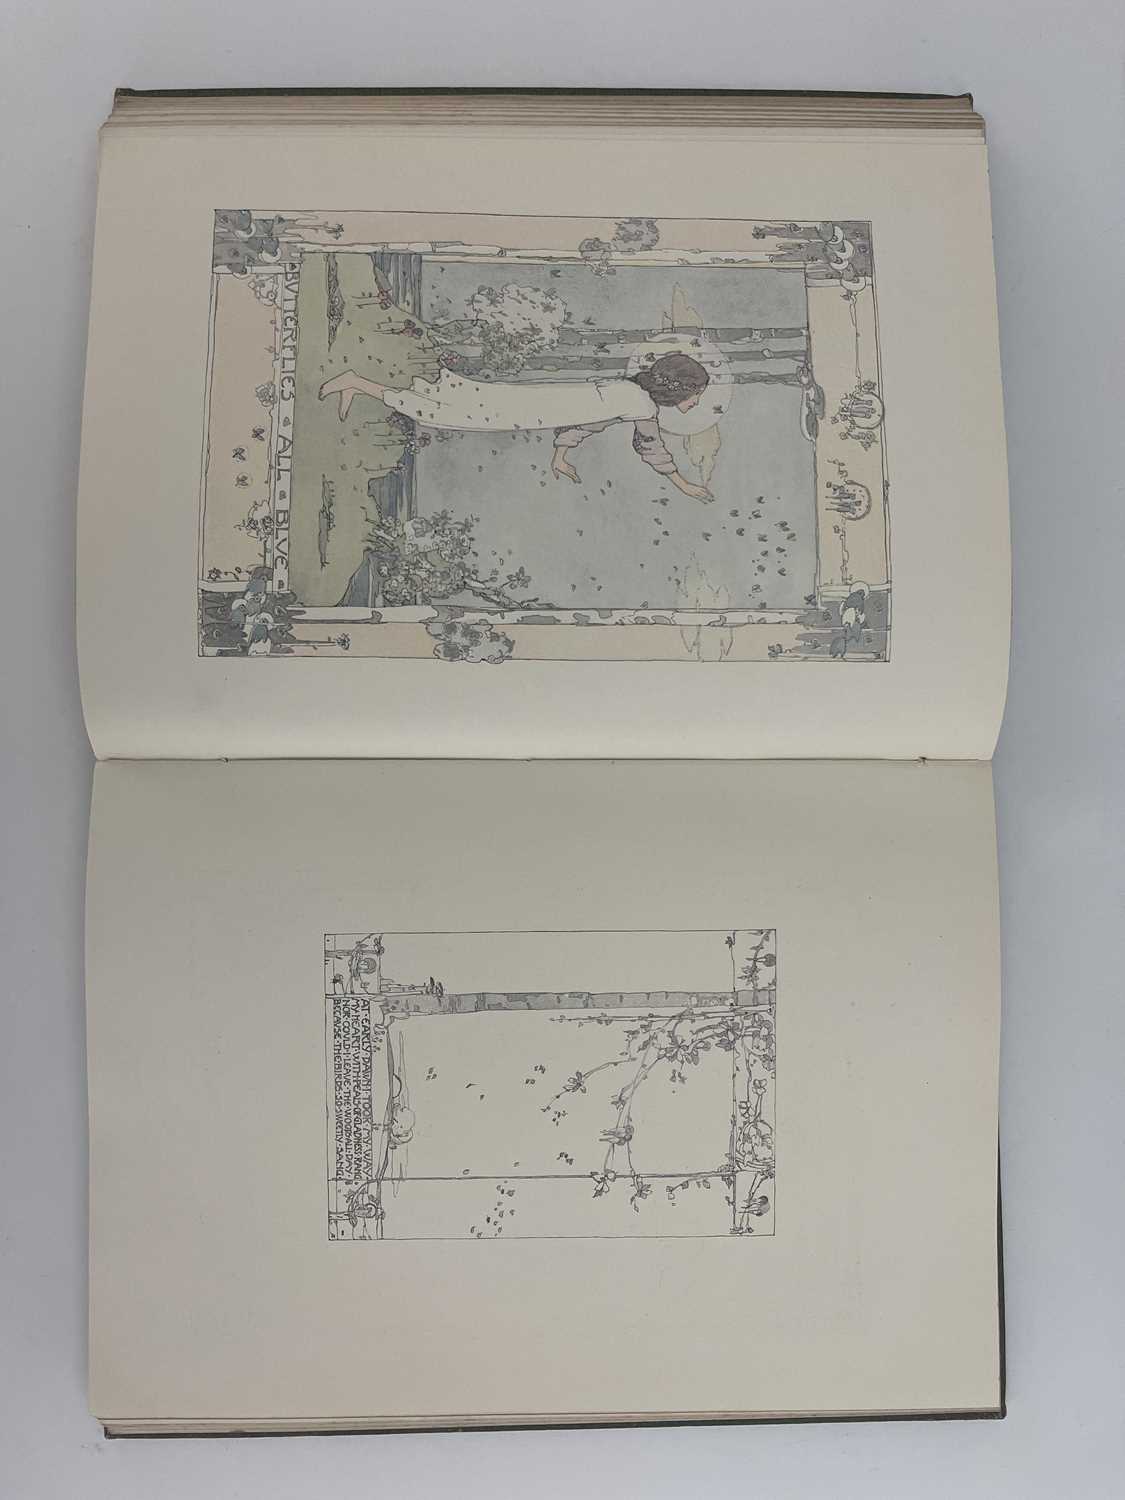 Ashbee, C R, 1909 and 1974, Modern English Silverwork, new edition with facsimile of the original, - Image 6 of 6